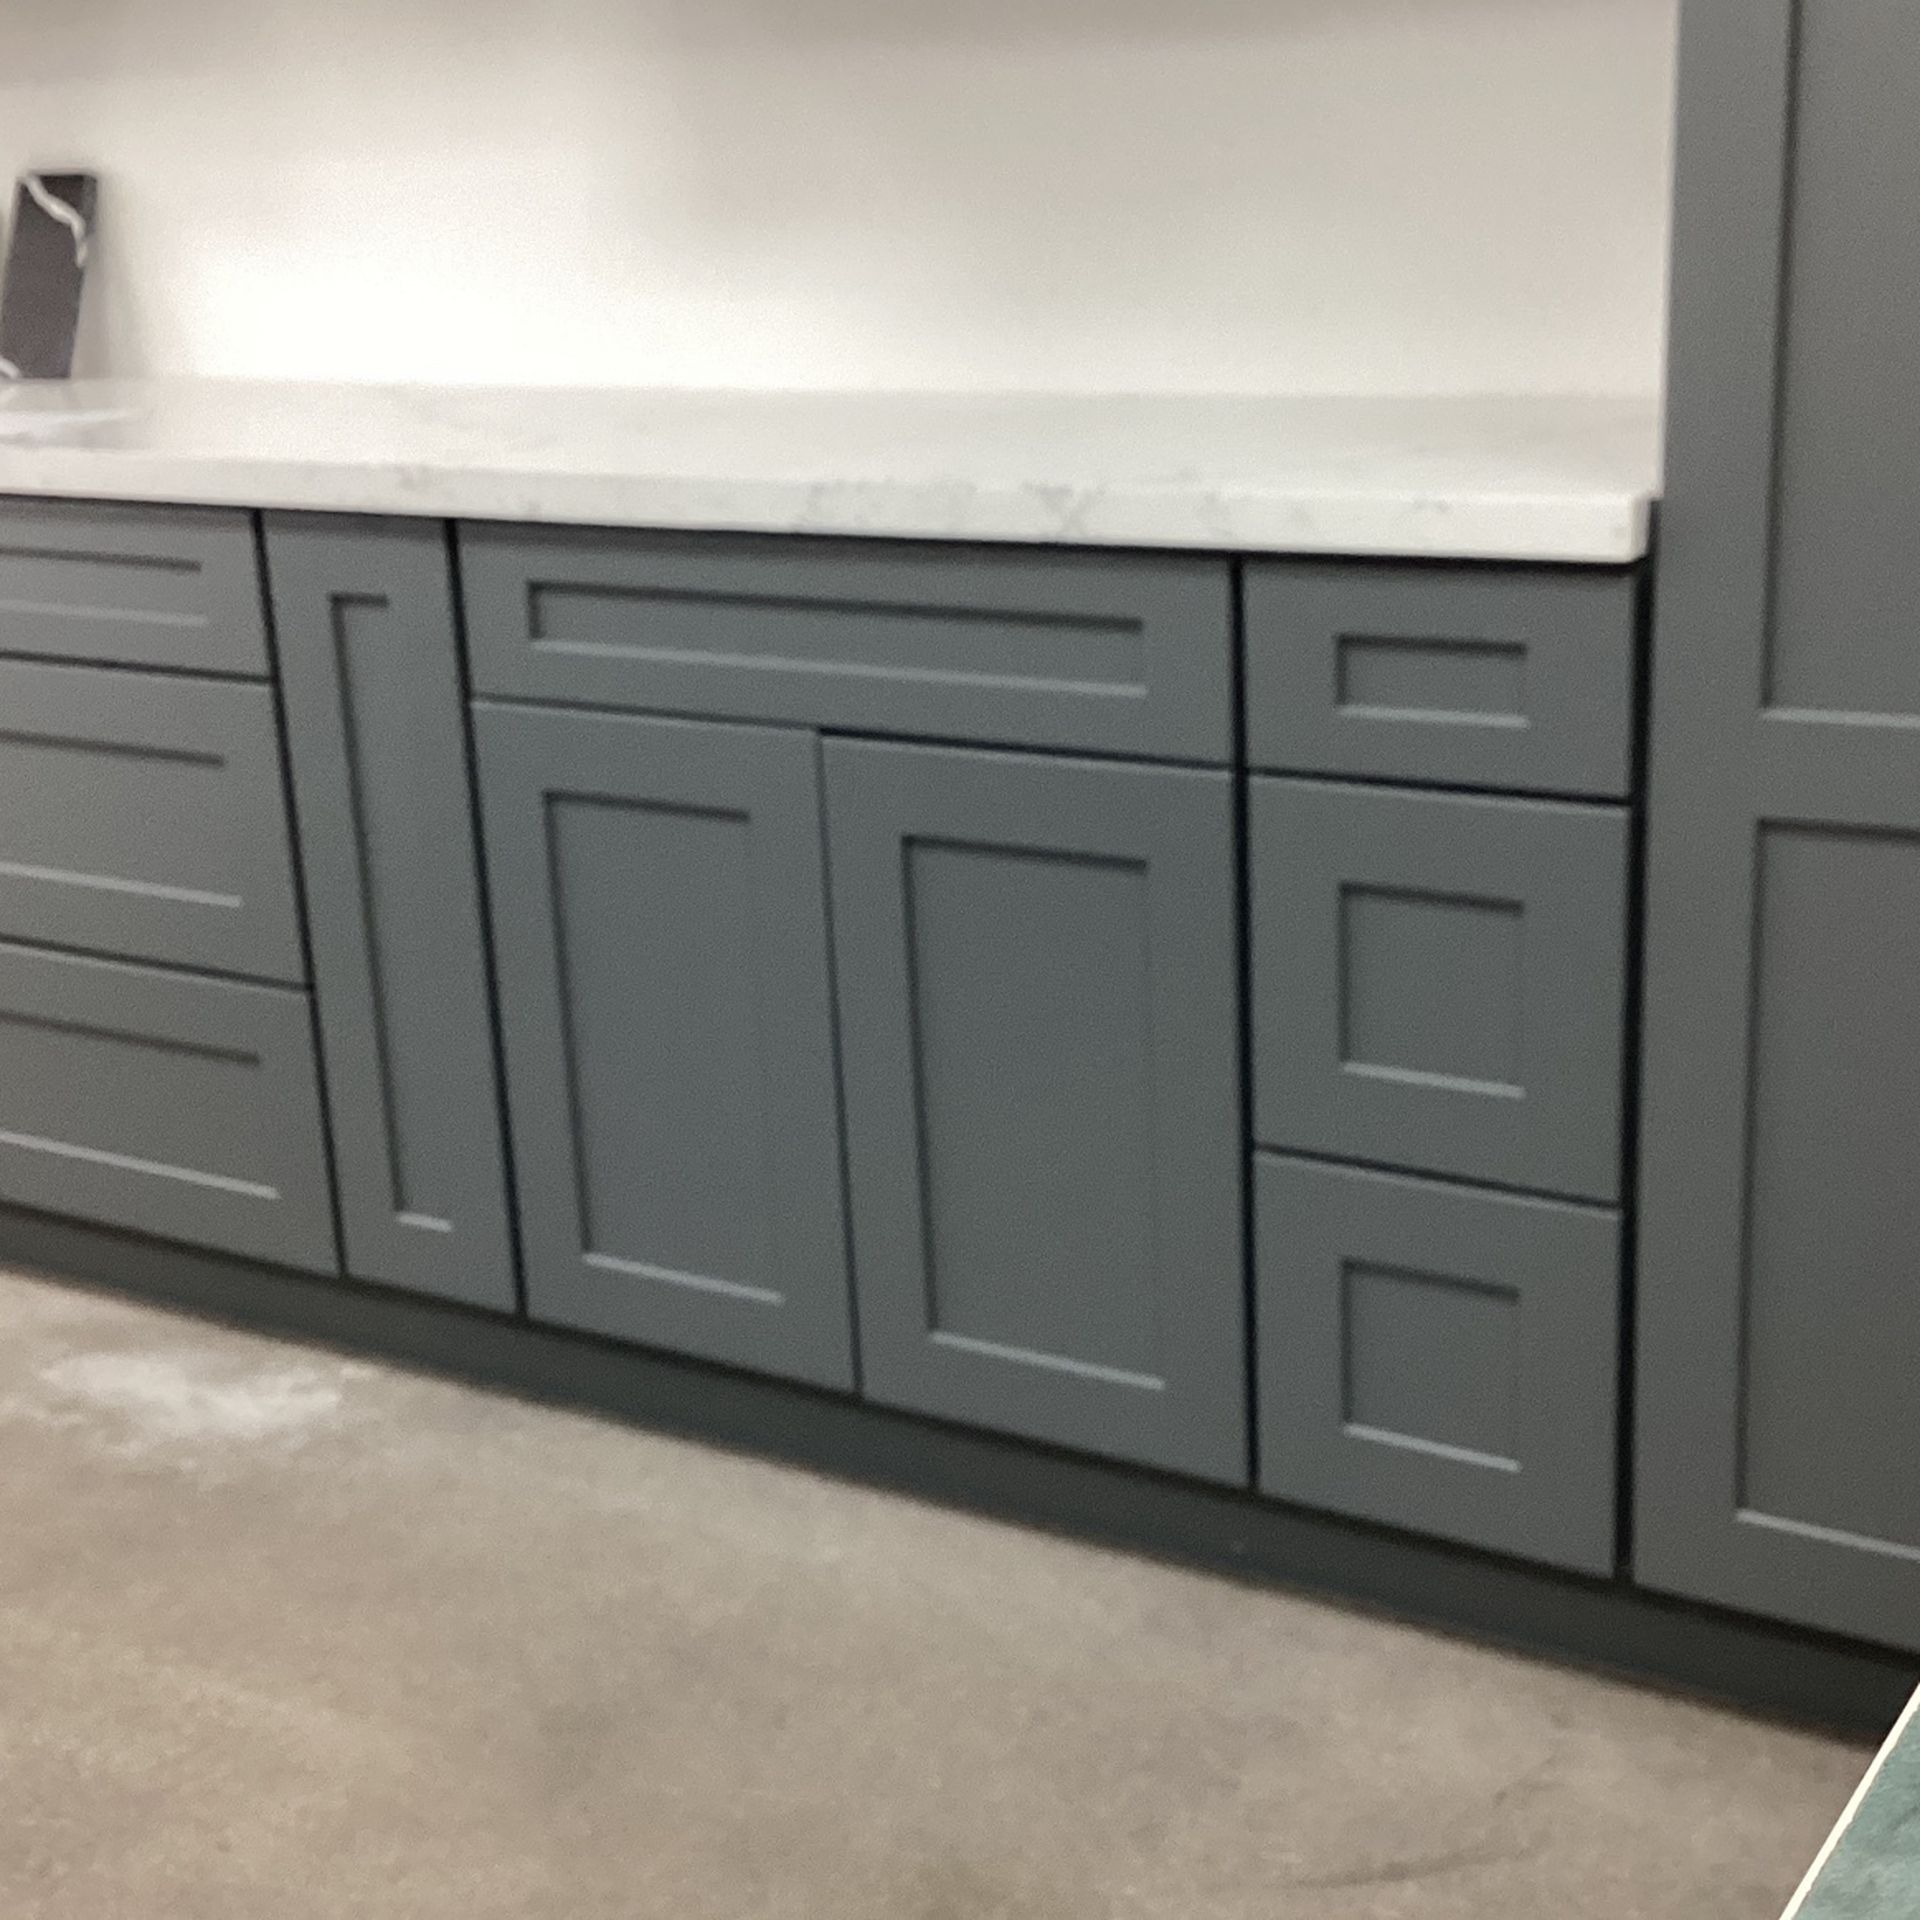 Kitchen Base Cabinets - All Sizes bases cabinets In Grey